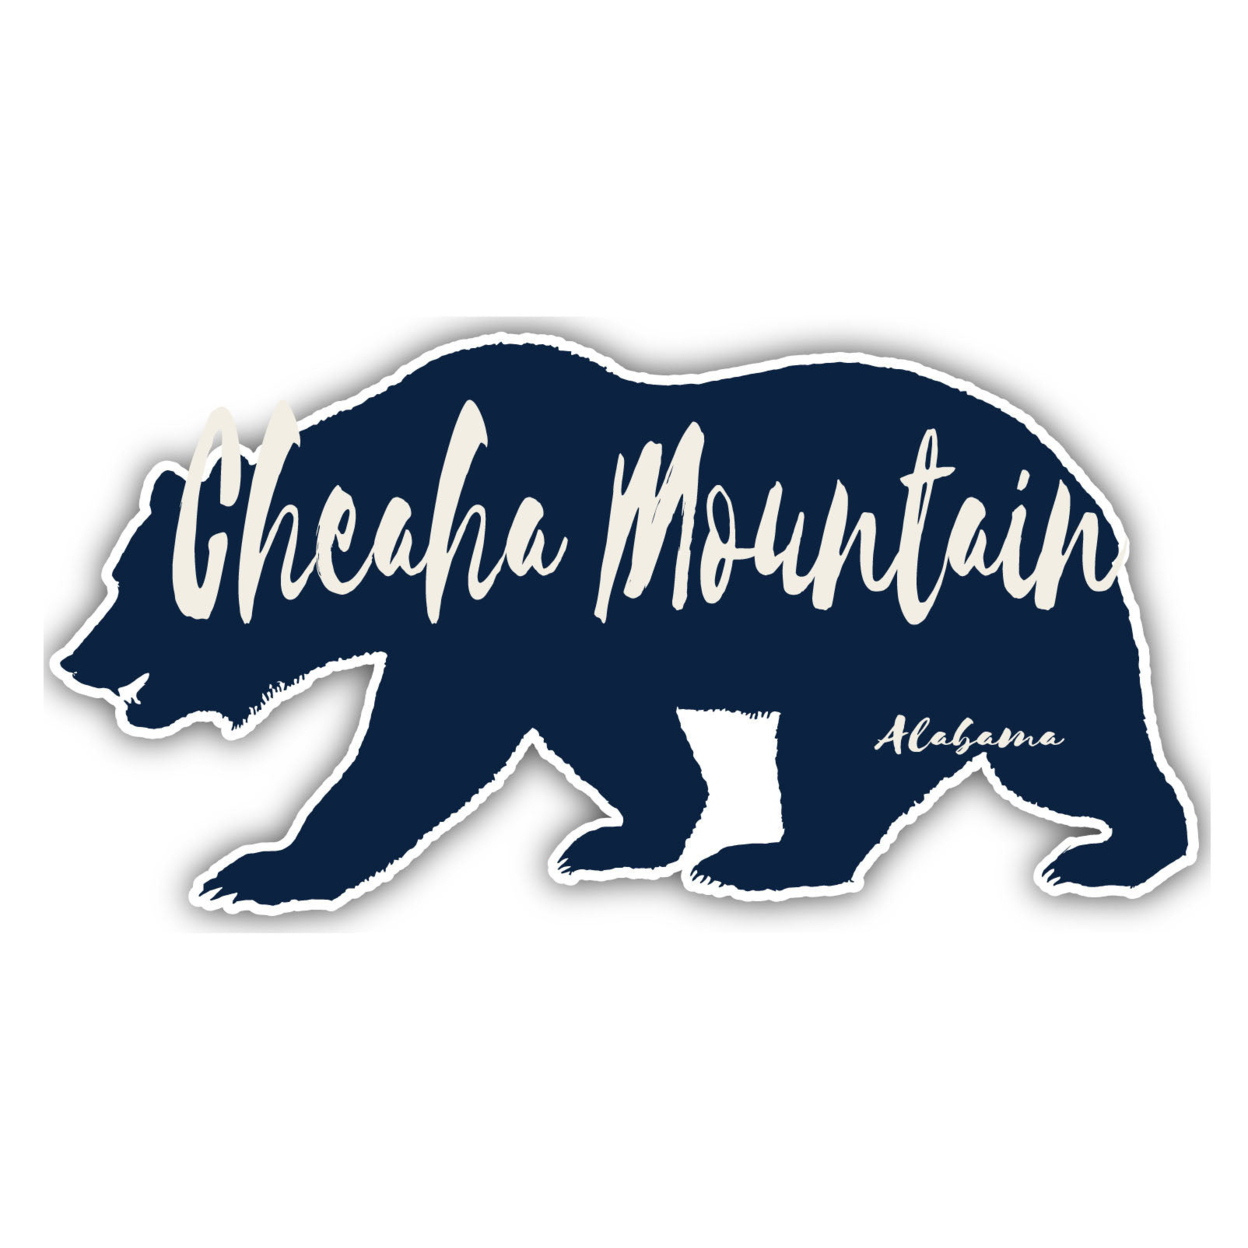 Cheaha Mountain Alabama Souvenir Decorative Stickers (Choose Theme And Size) - 4-Pack, 12-Inch, Tent